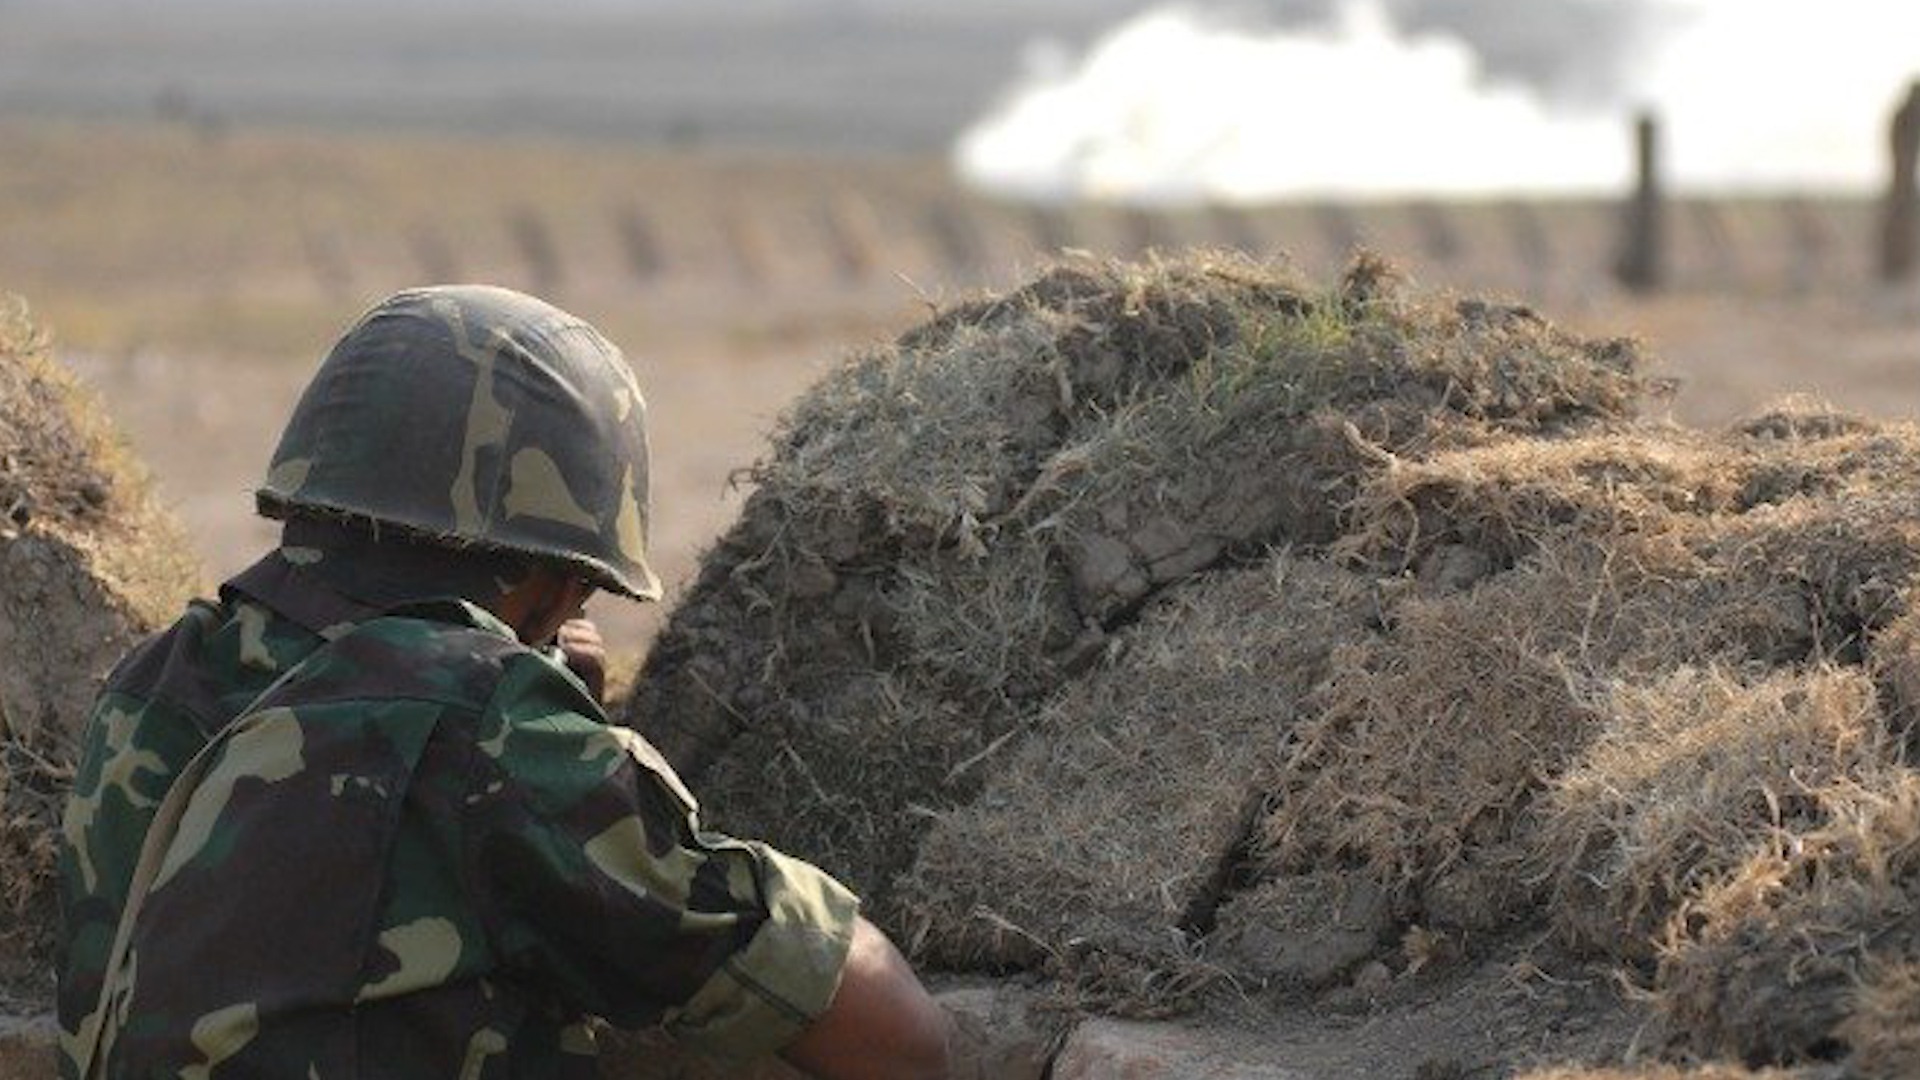 Karabakh: Broken ceasefire, wounded soldiers, and silence from peacekeepers